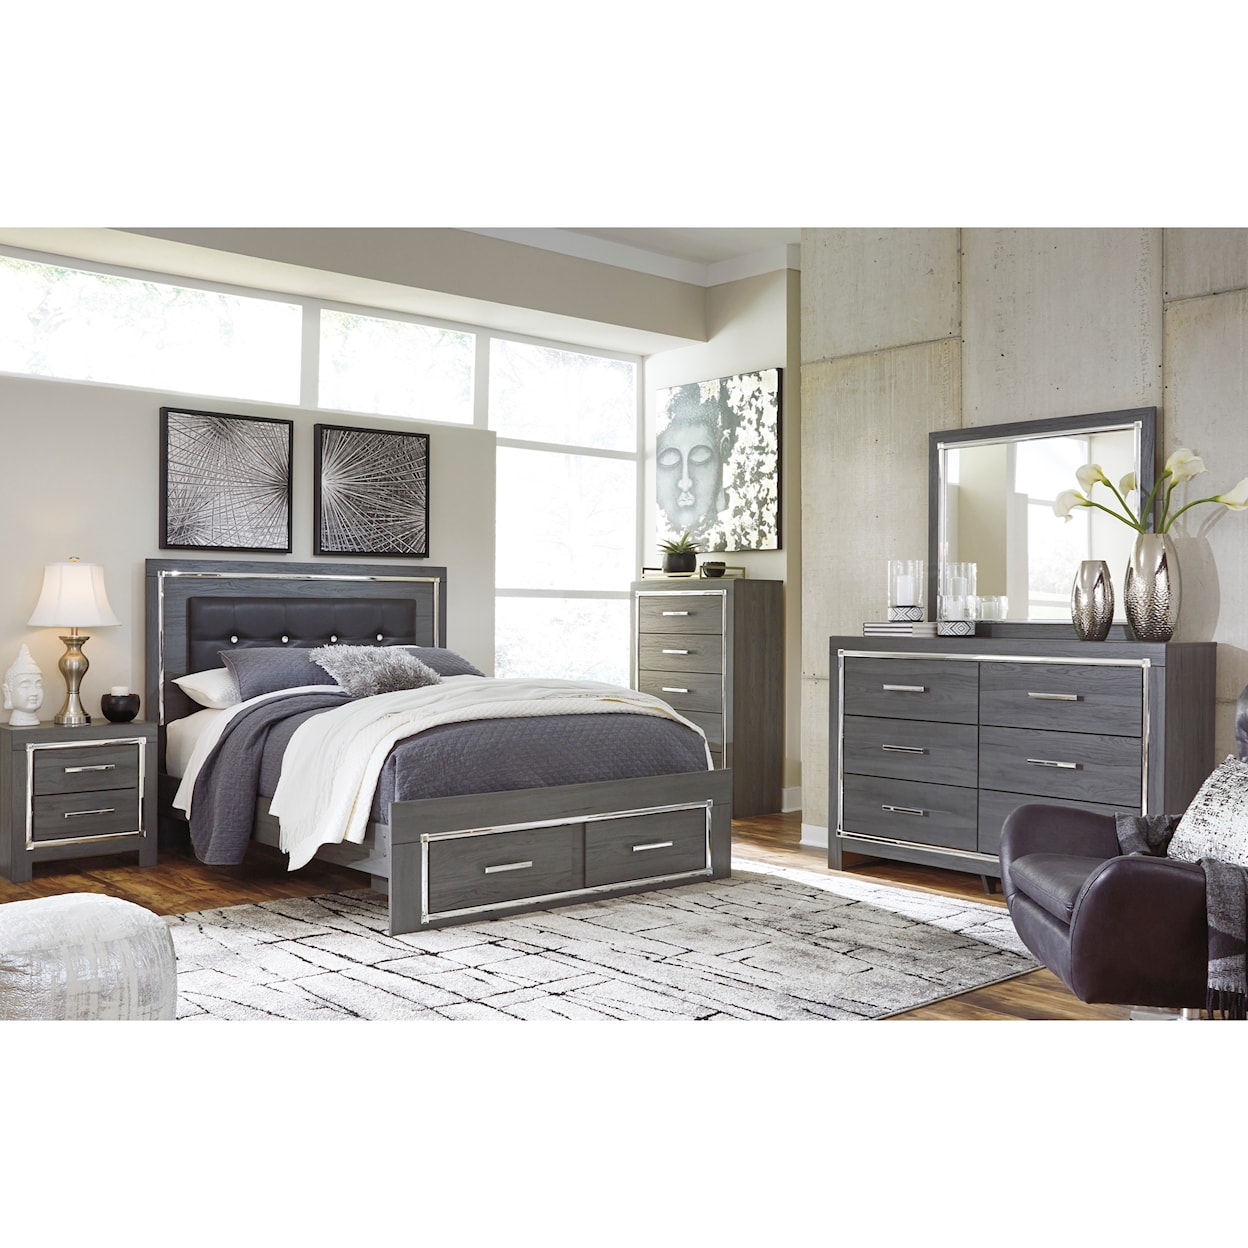 Signature Design by Ashley Lodanna King Bedroom Group